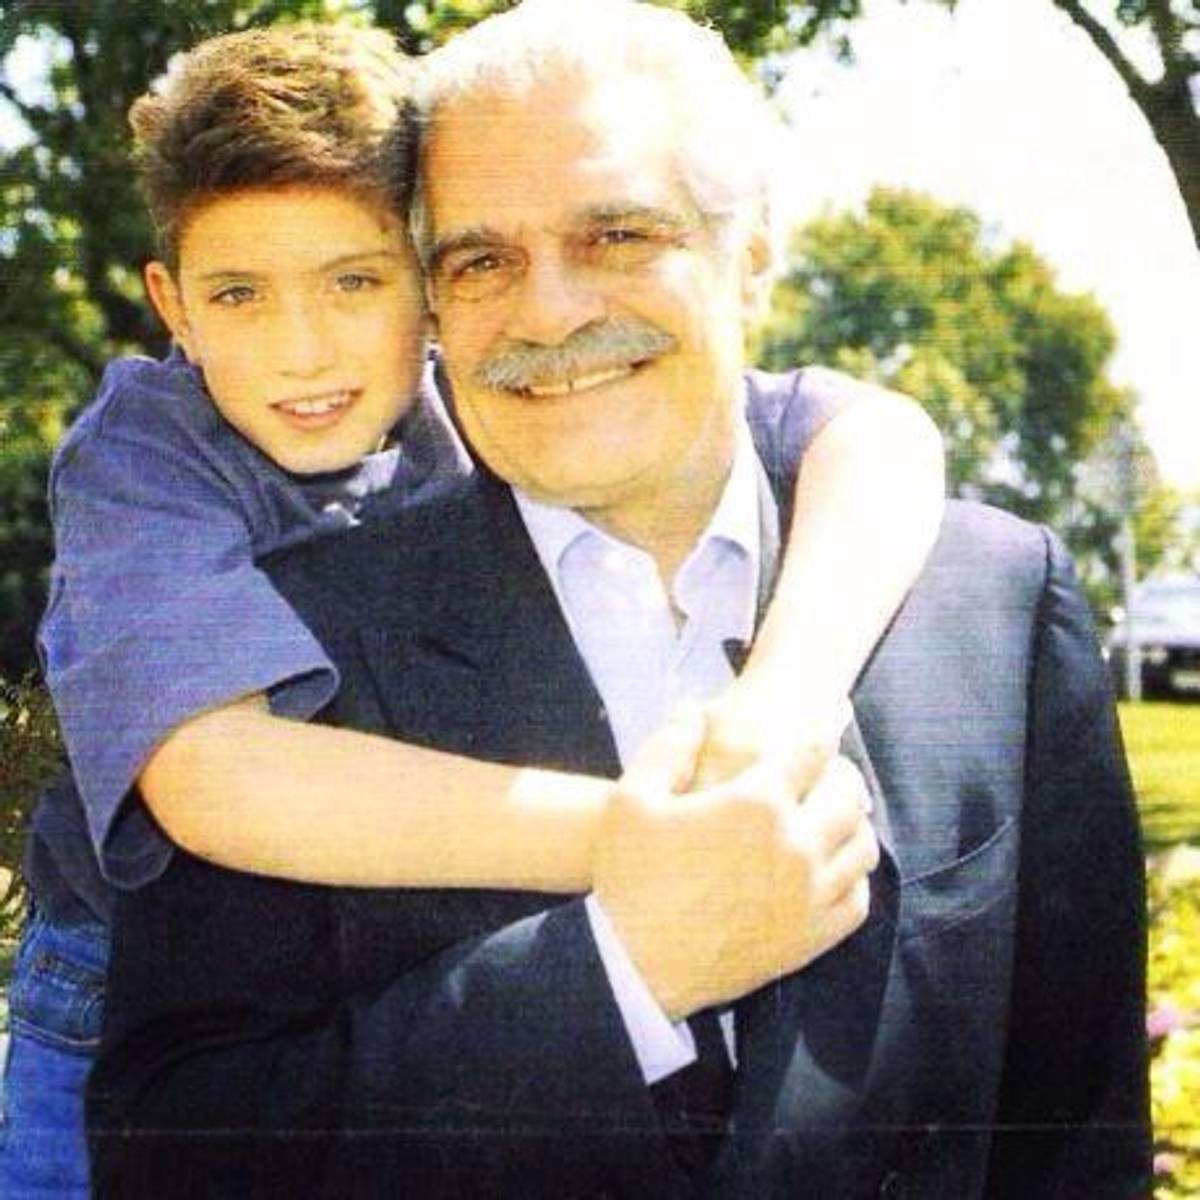 The author with his grandfather, Omar Sharif